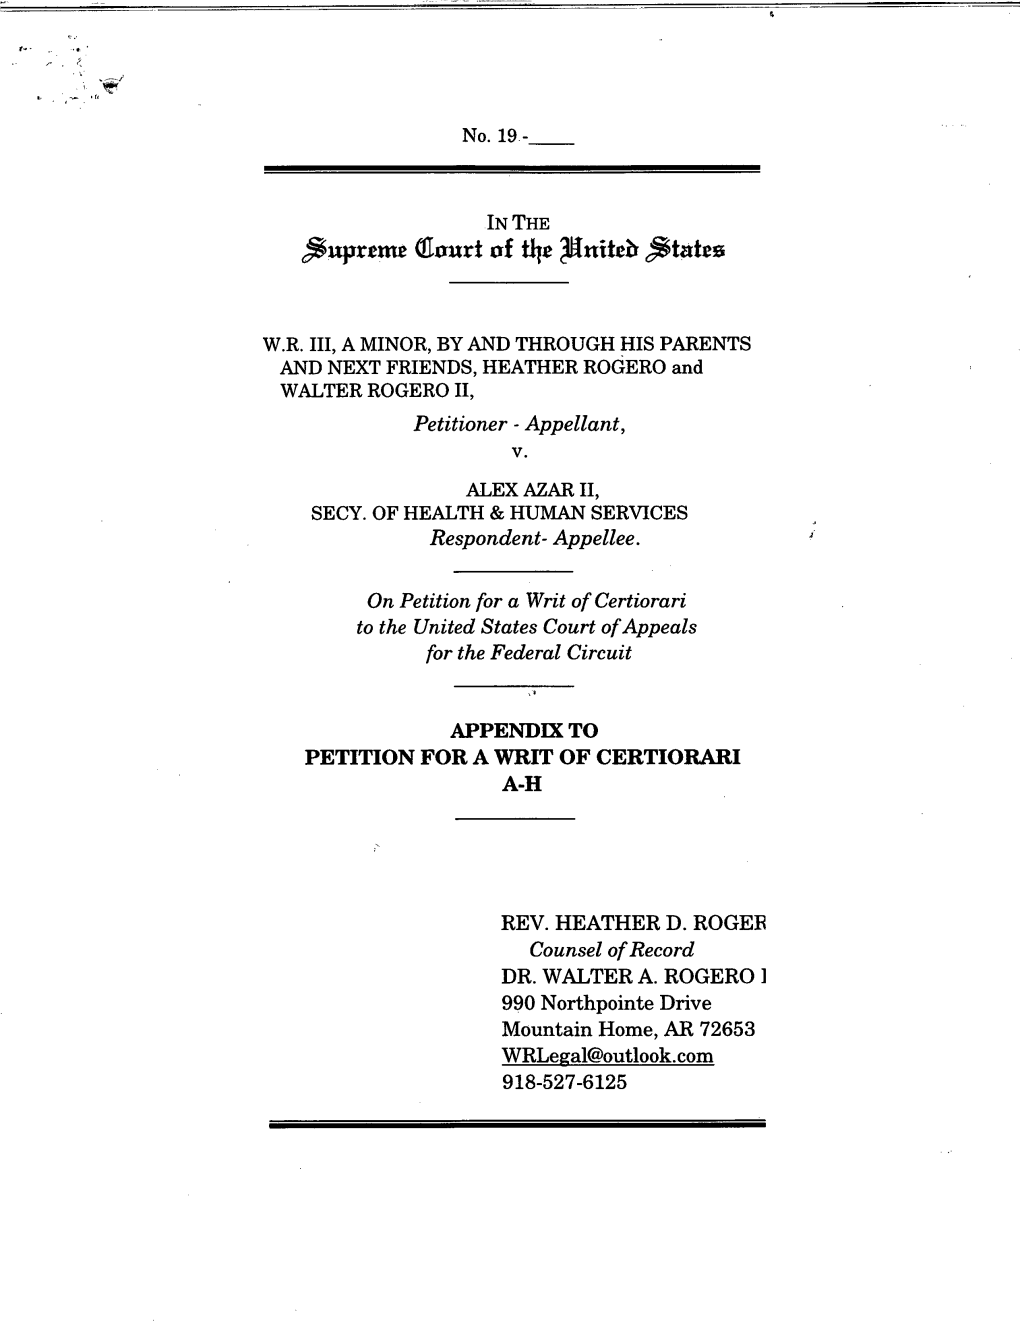 Appendix to Petition for a Writ of Certiorari A-H